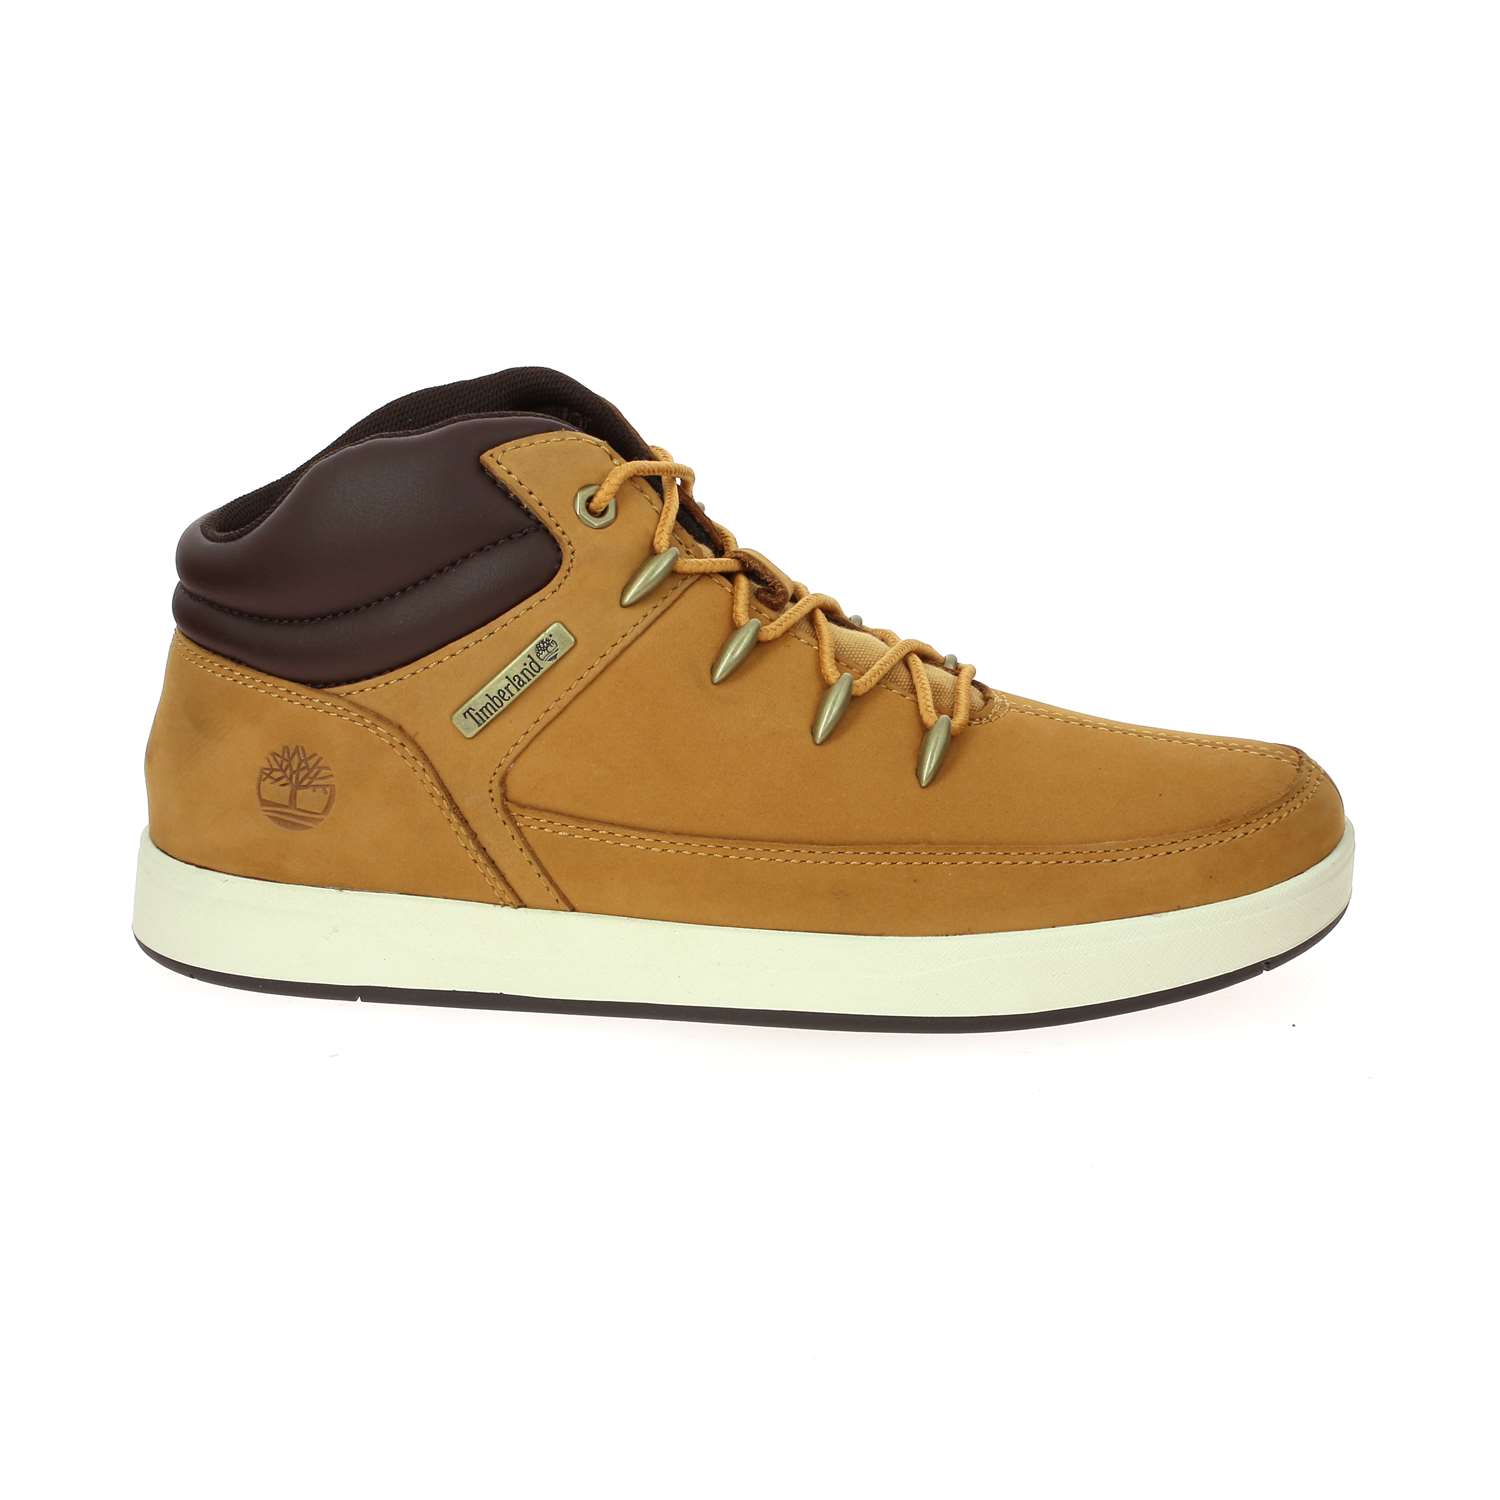 2 - DAVIS SQUARE - TIMBERLAND - Chaussures montantes - Cuir / textile